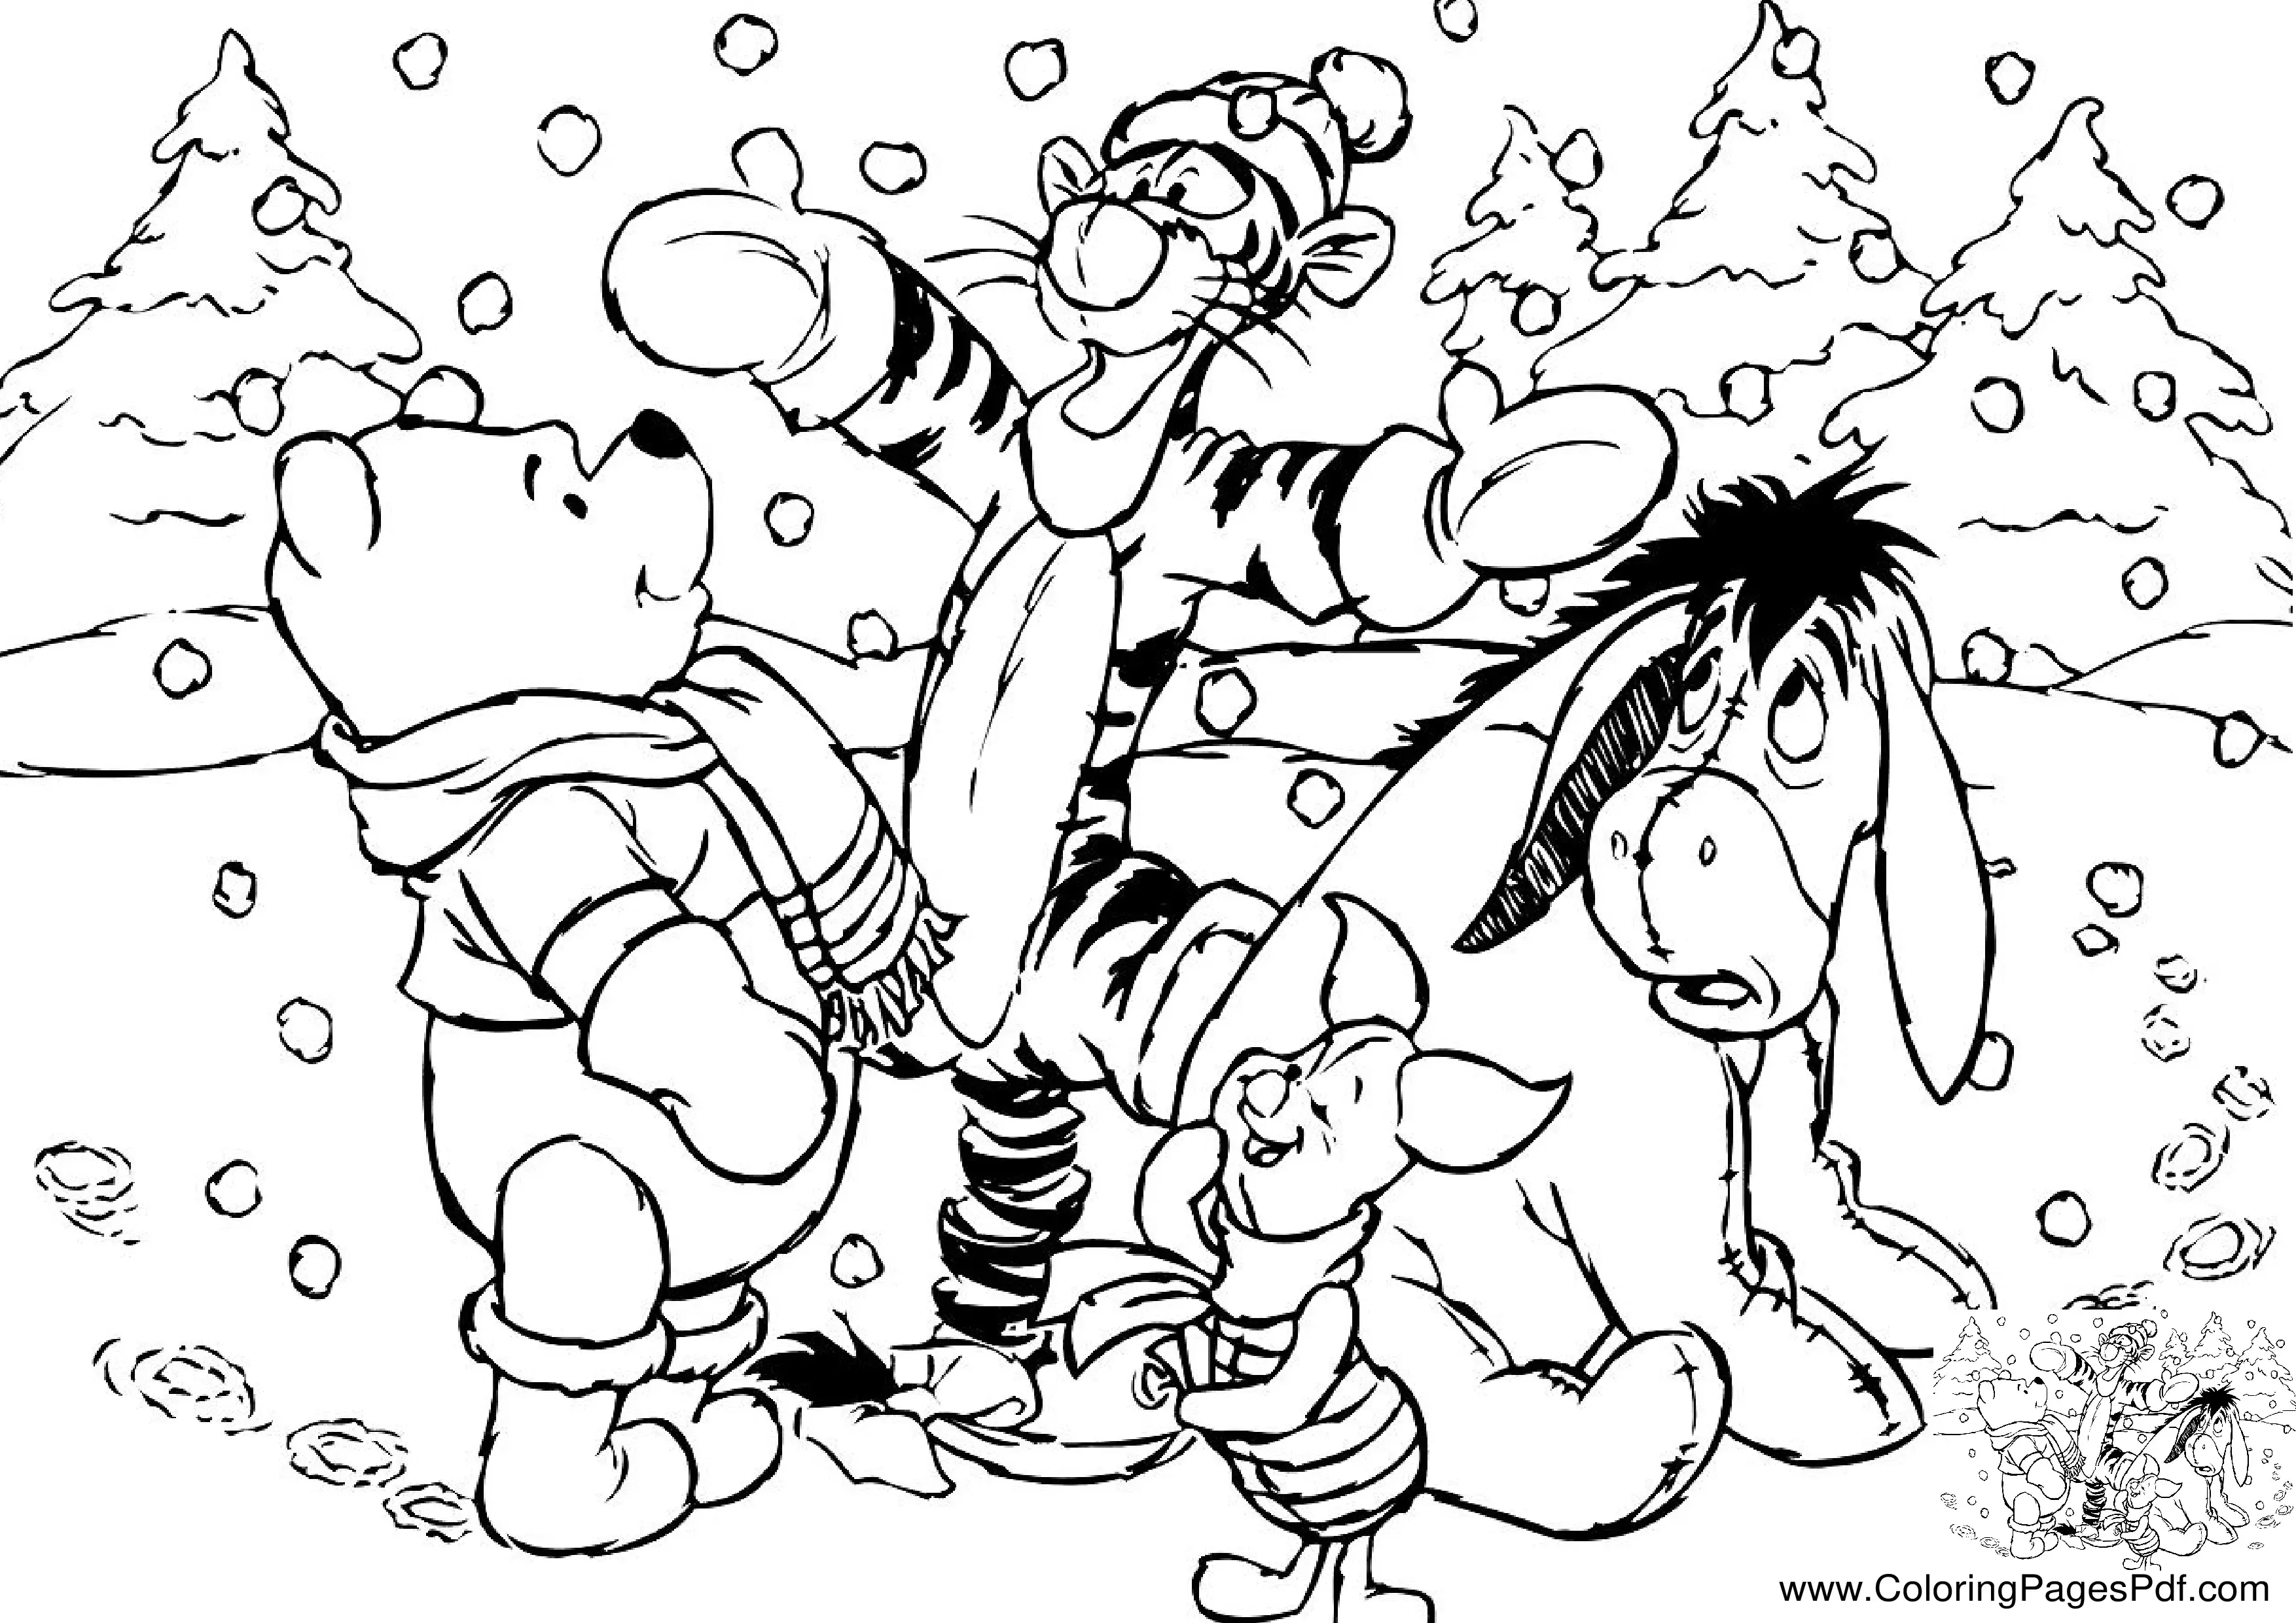 Winnie the pooh coloring pages cute